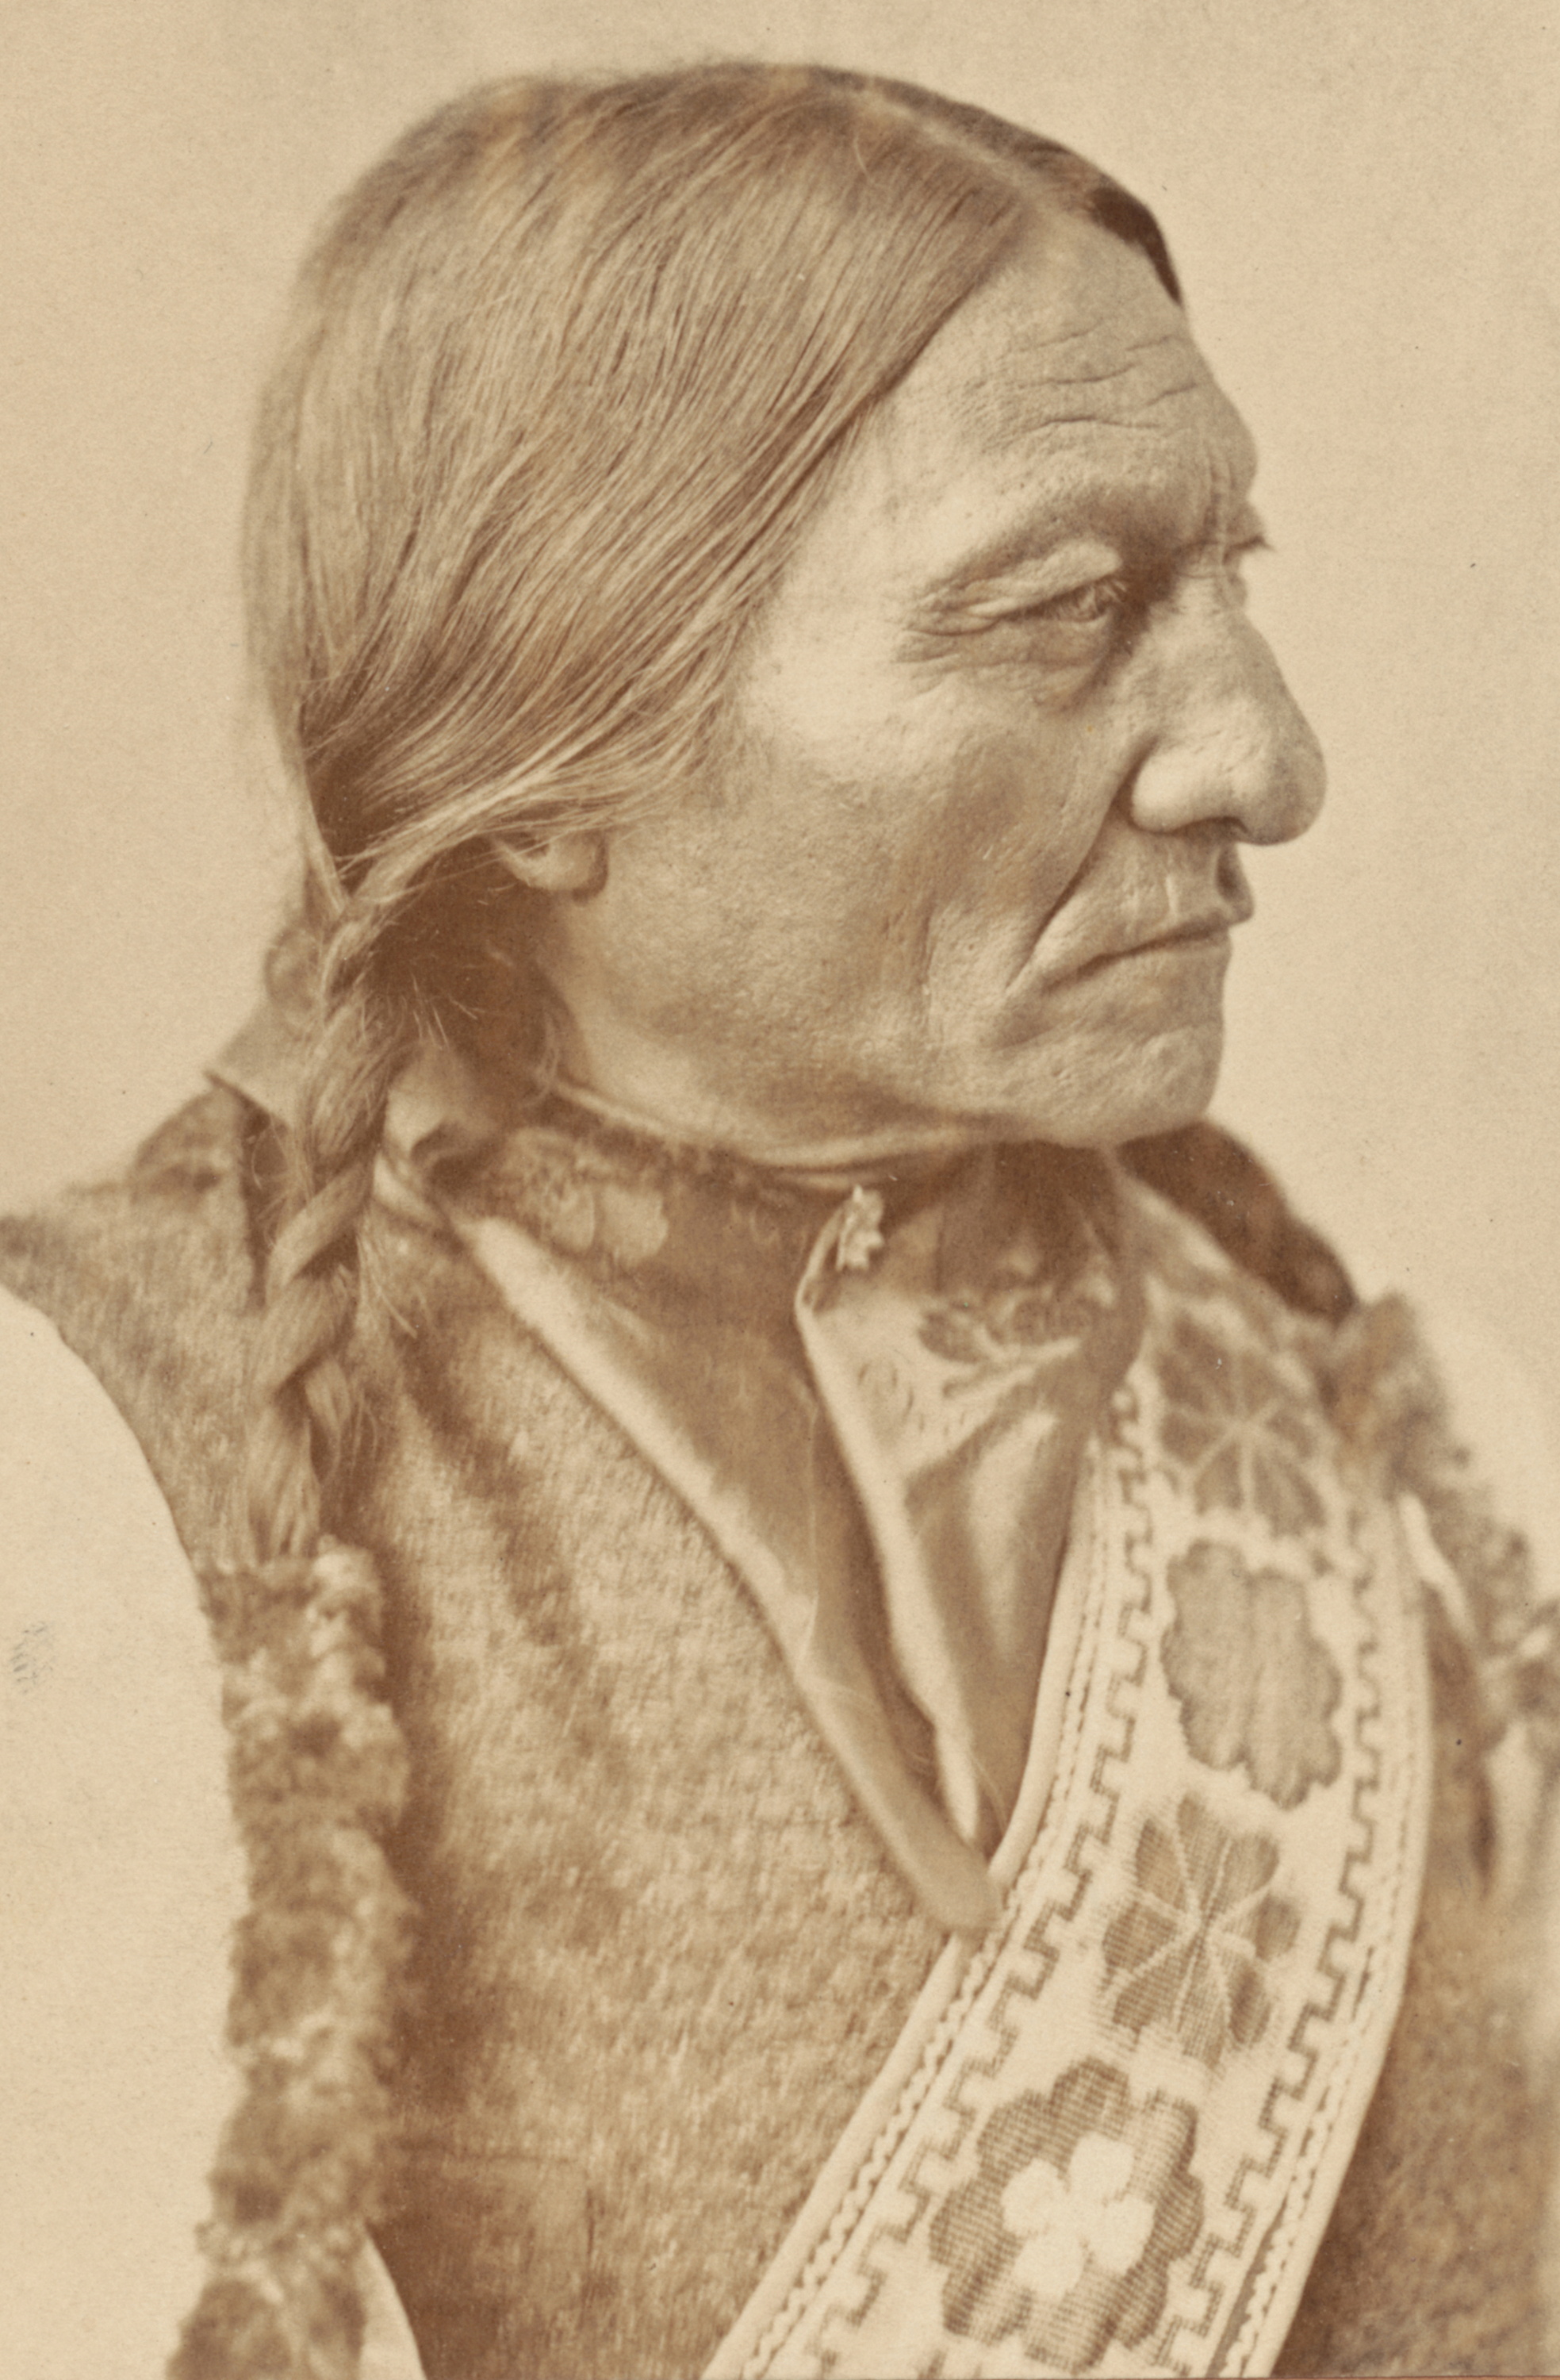 Famed 19th century Native American leader Sitting Bull, who died in 1890, is seen in this picture from circa 1885